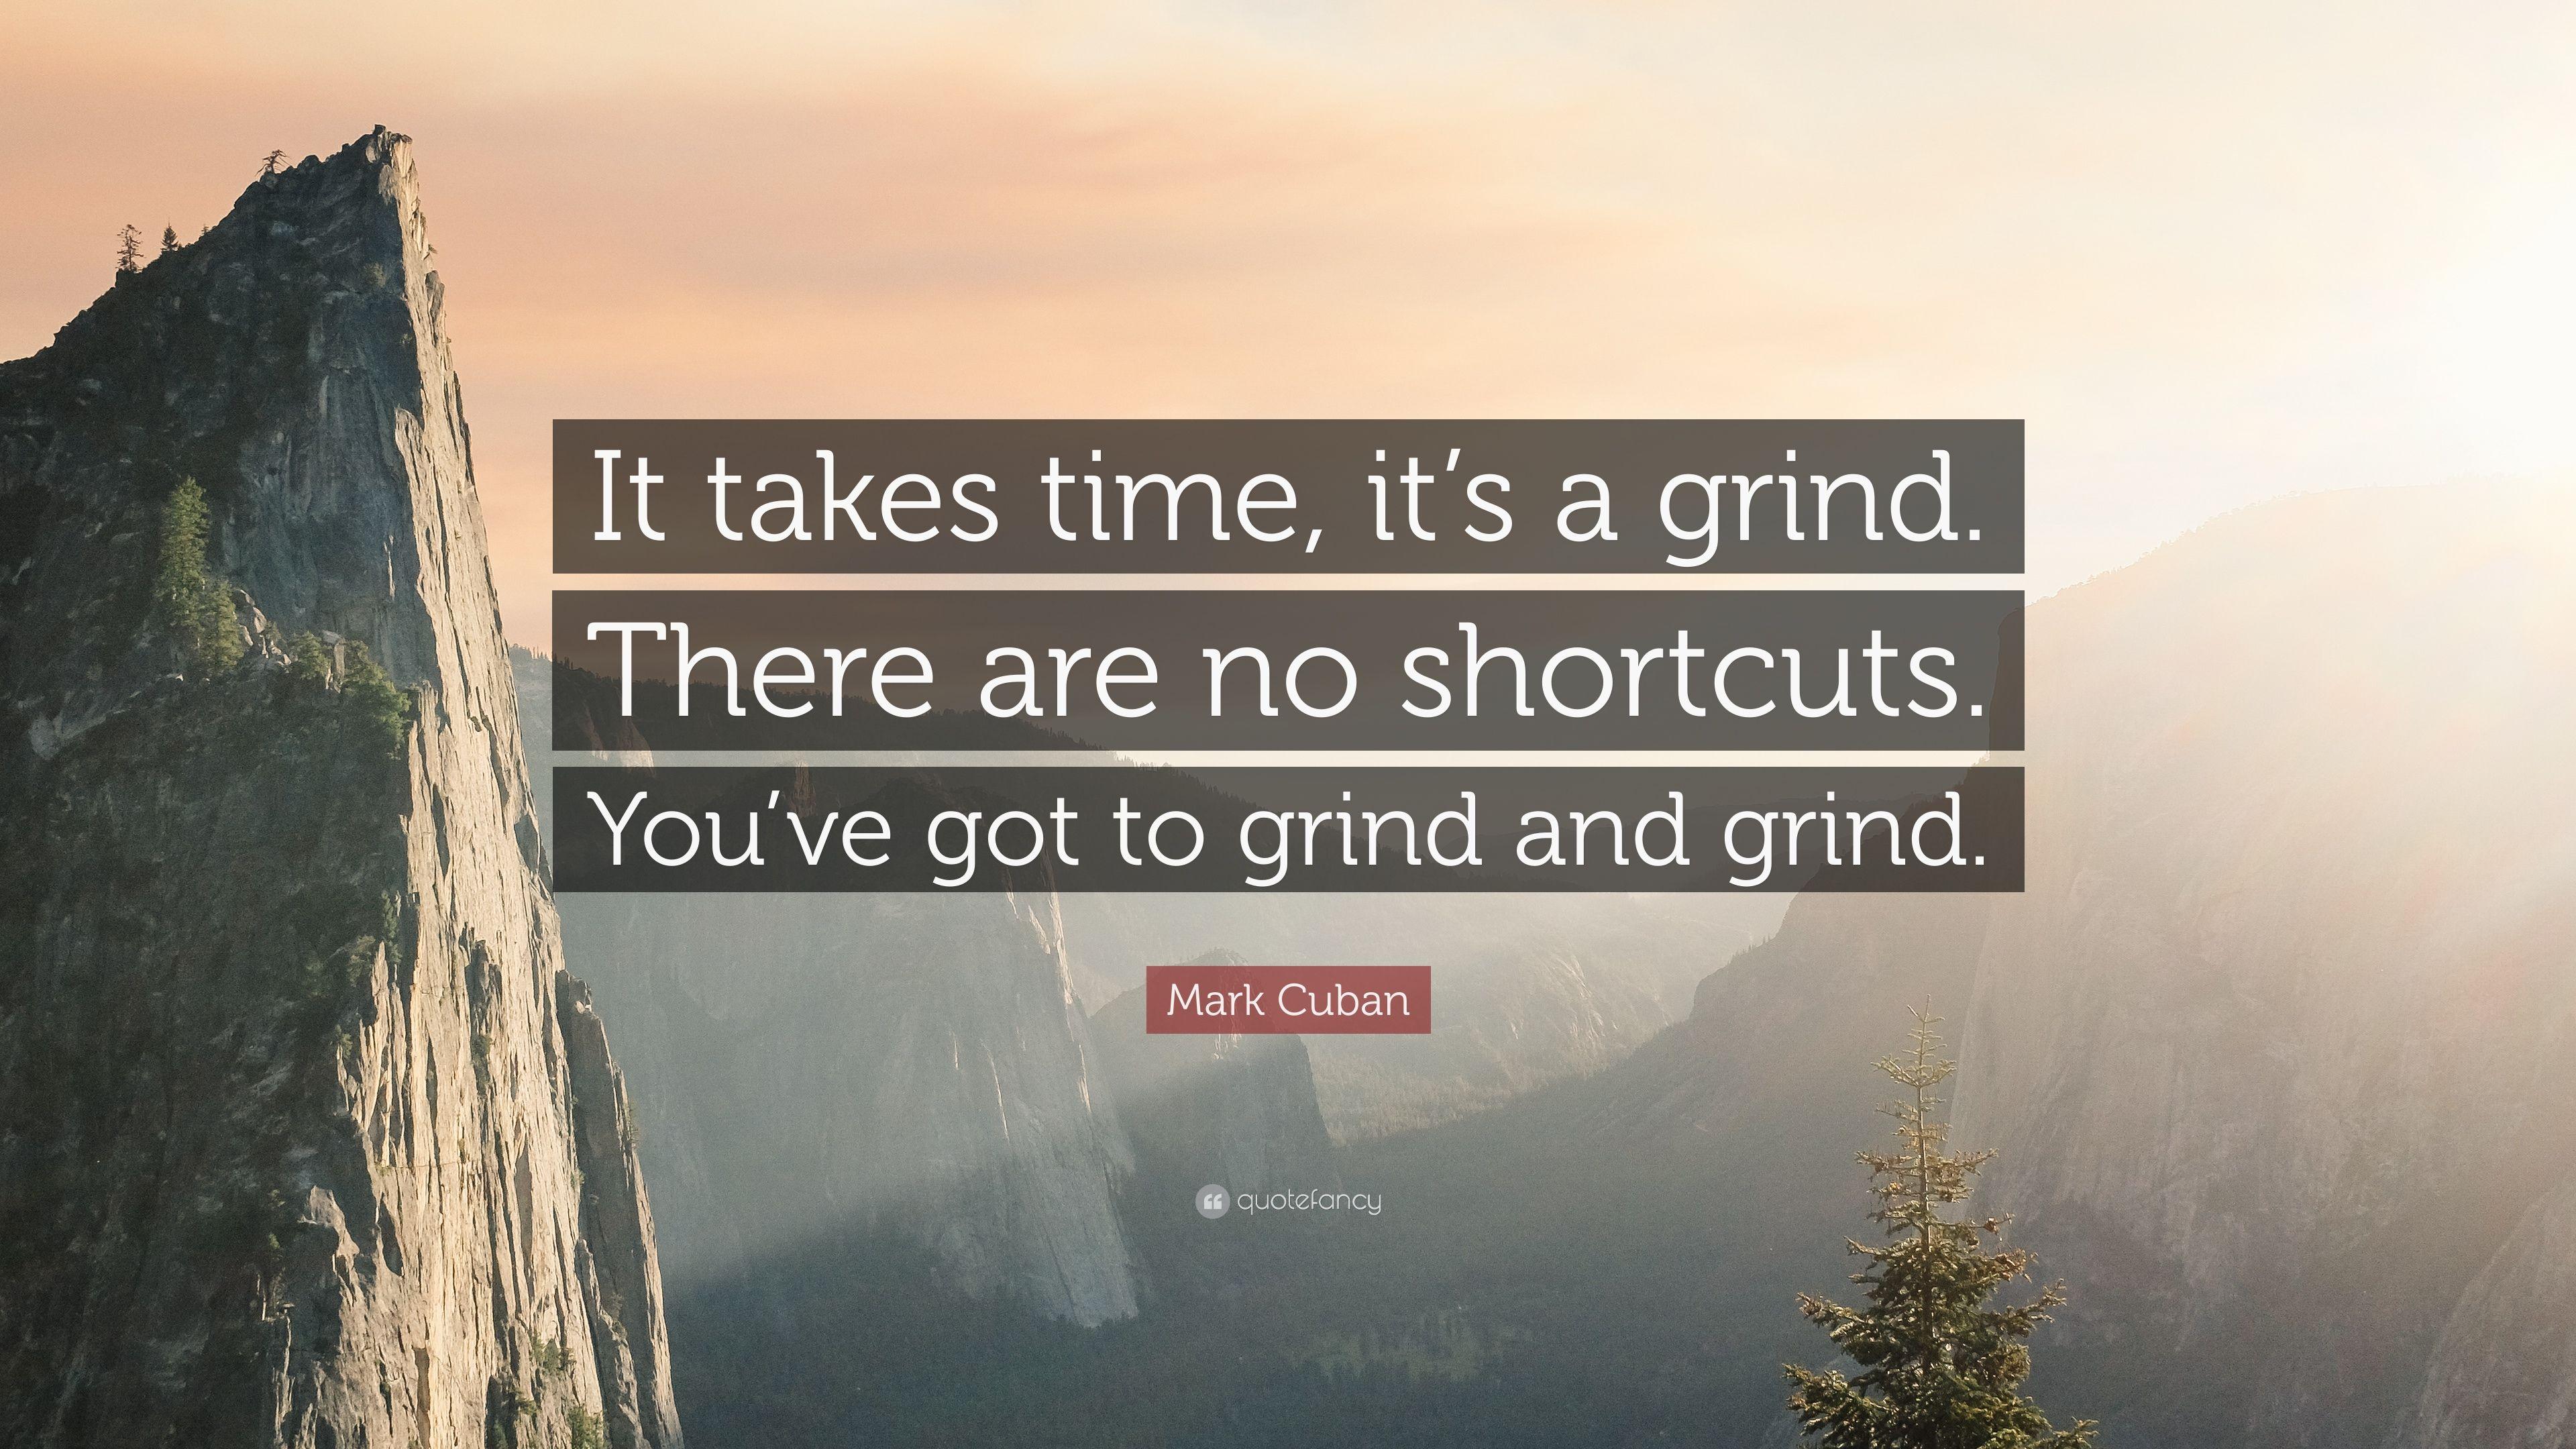 Mark Cuban Quote: “It takes time, it's a grind. There are no